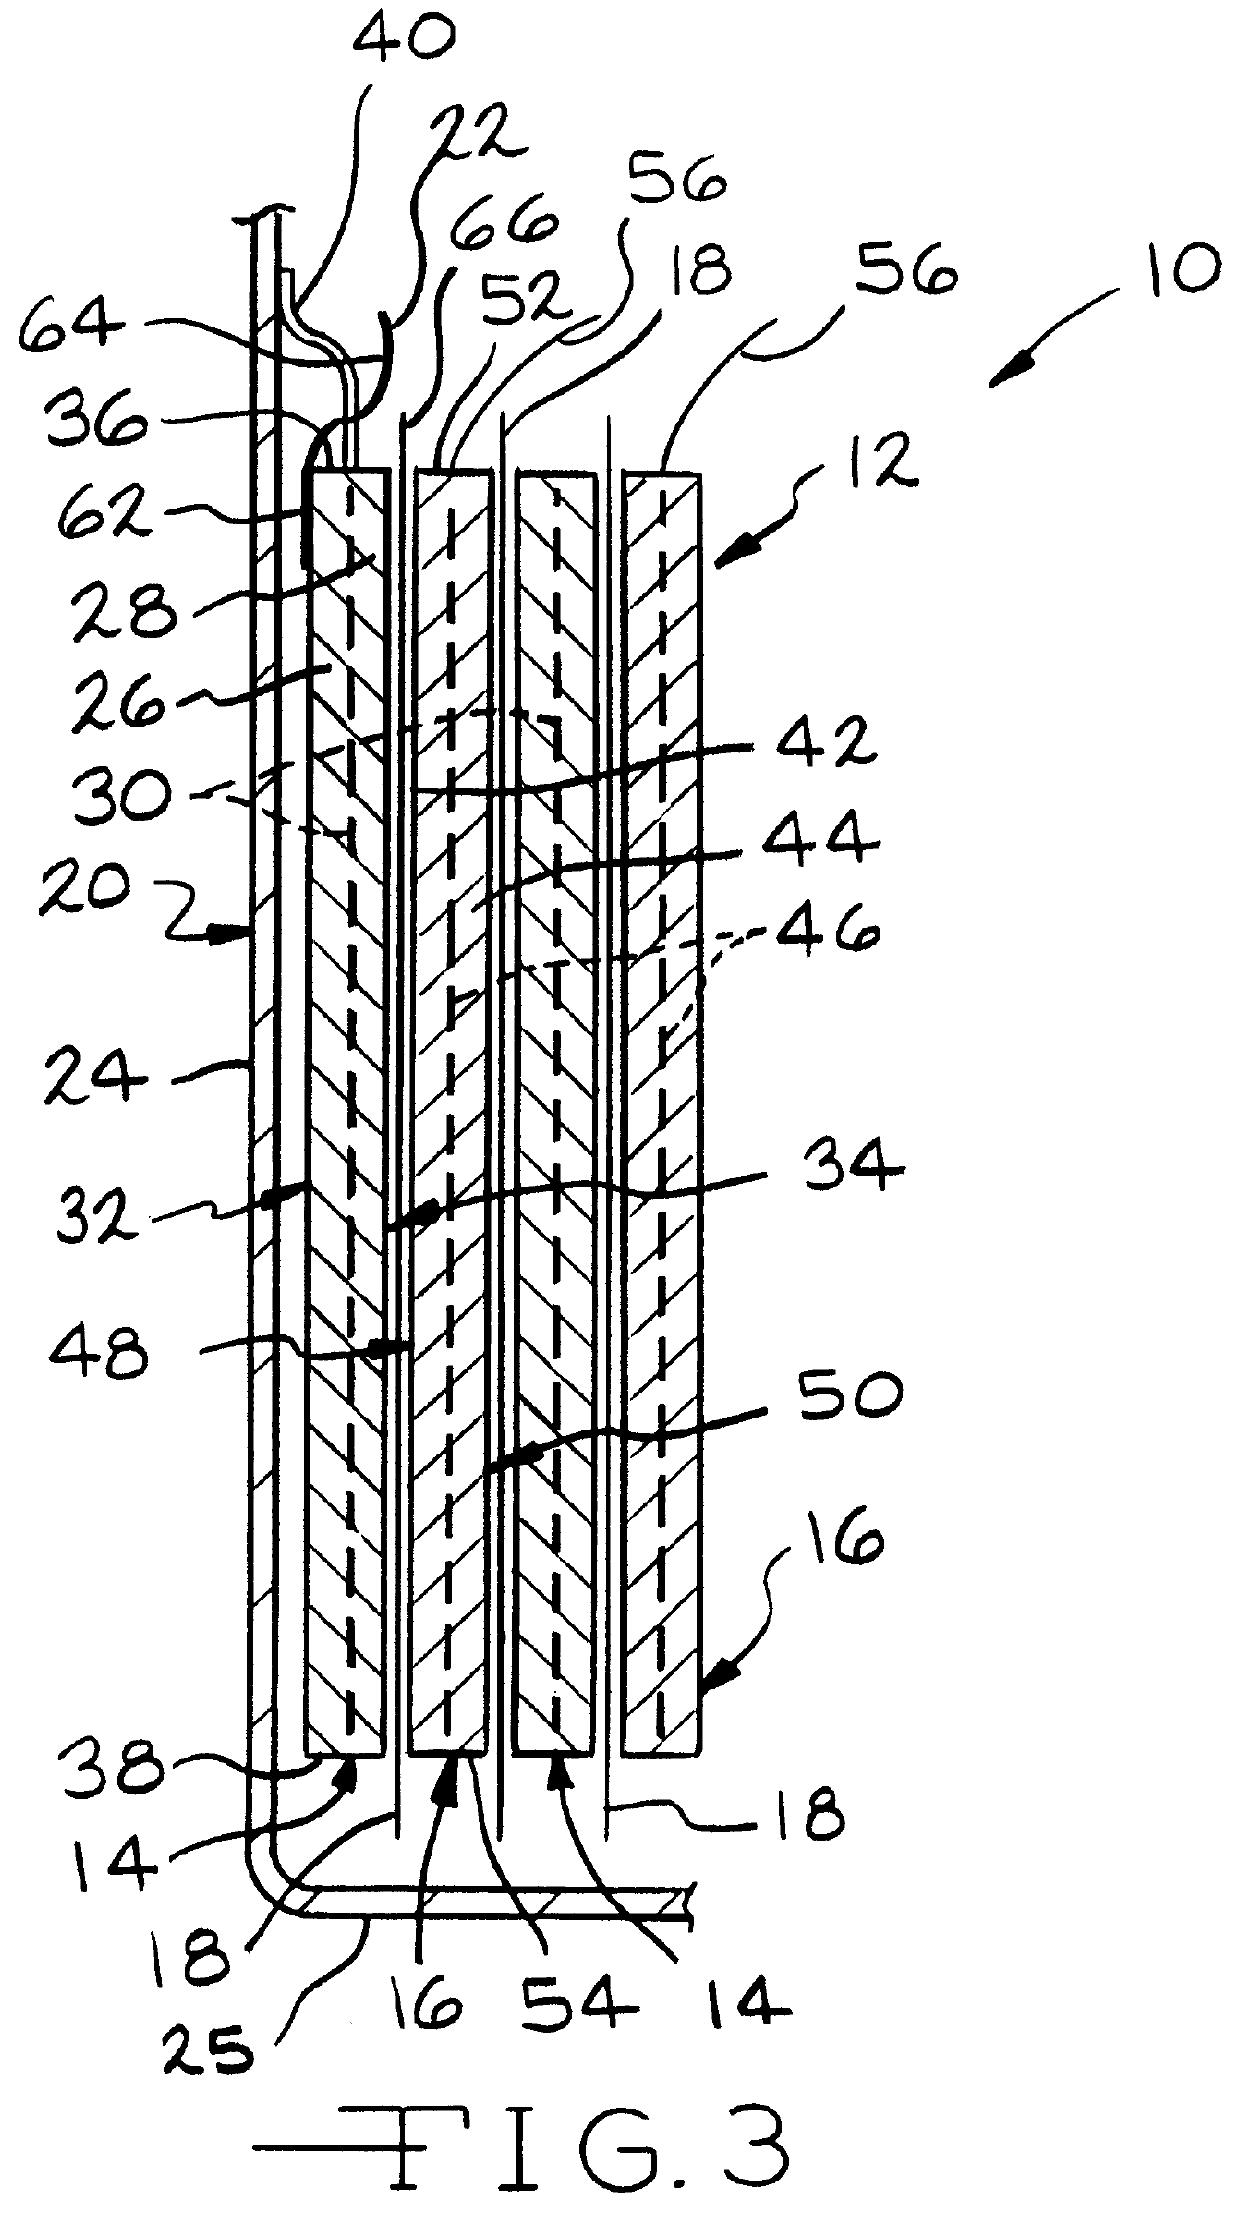 Slotted insulator for unsealed electrode edges in electrochemical cells